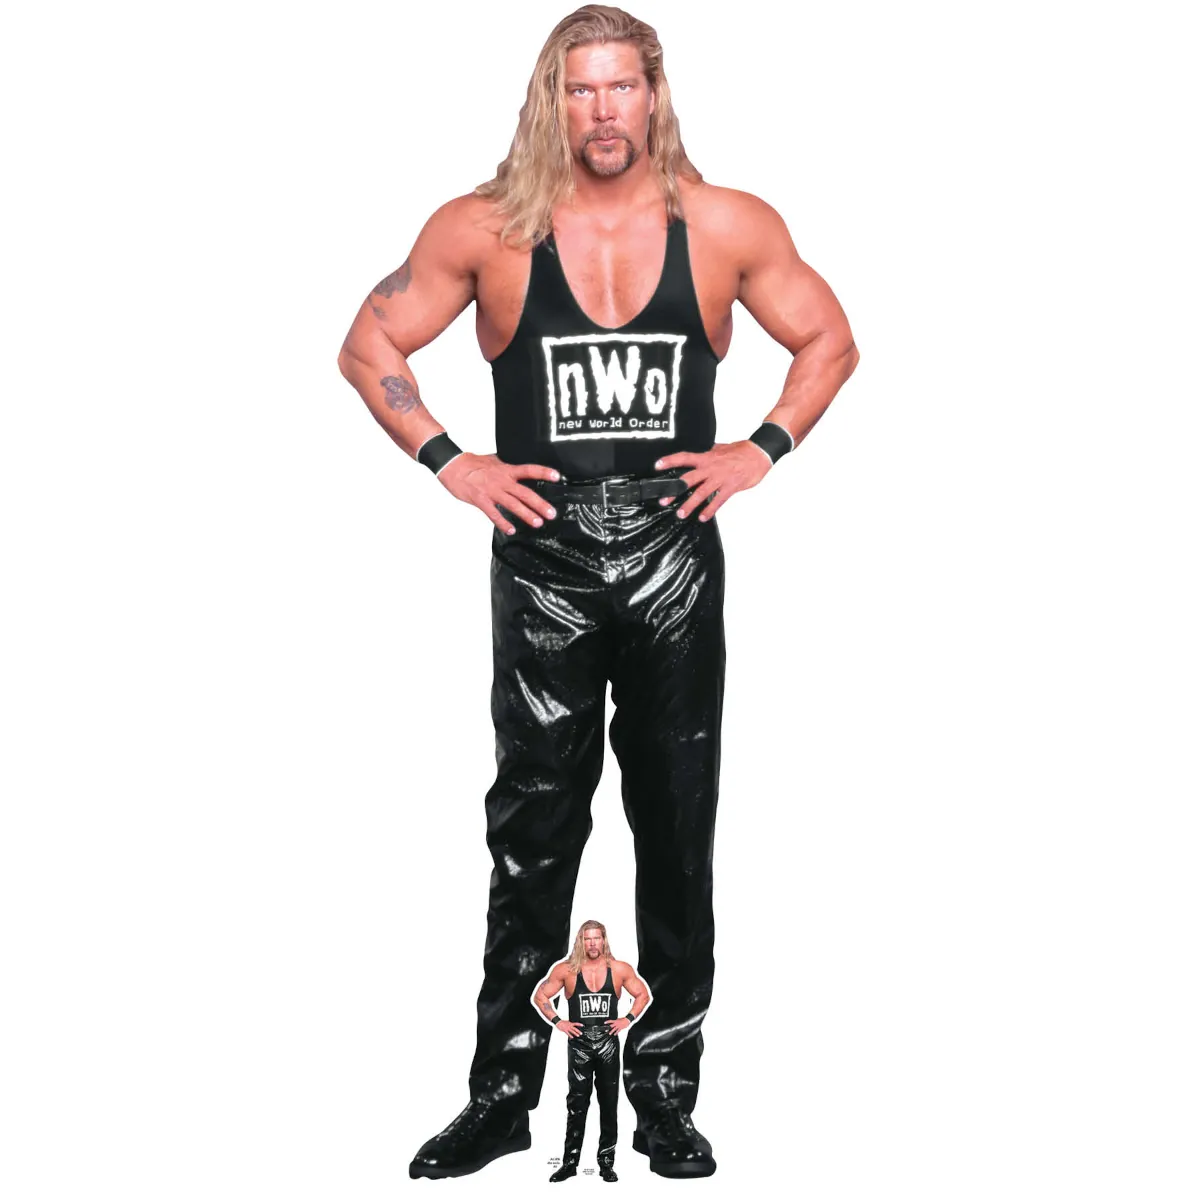 SC4413 Kevin Nash (WWE) Official Lifesize + Mini Cardboard Cutout Standee Front